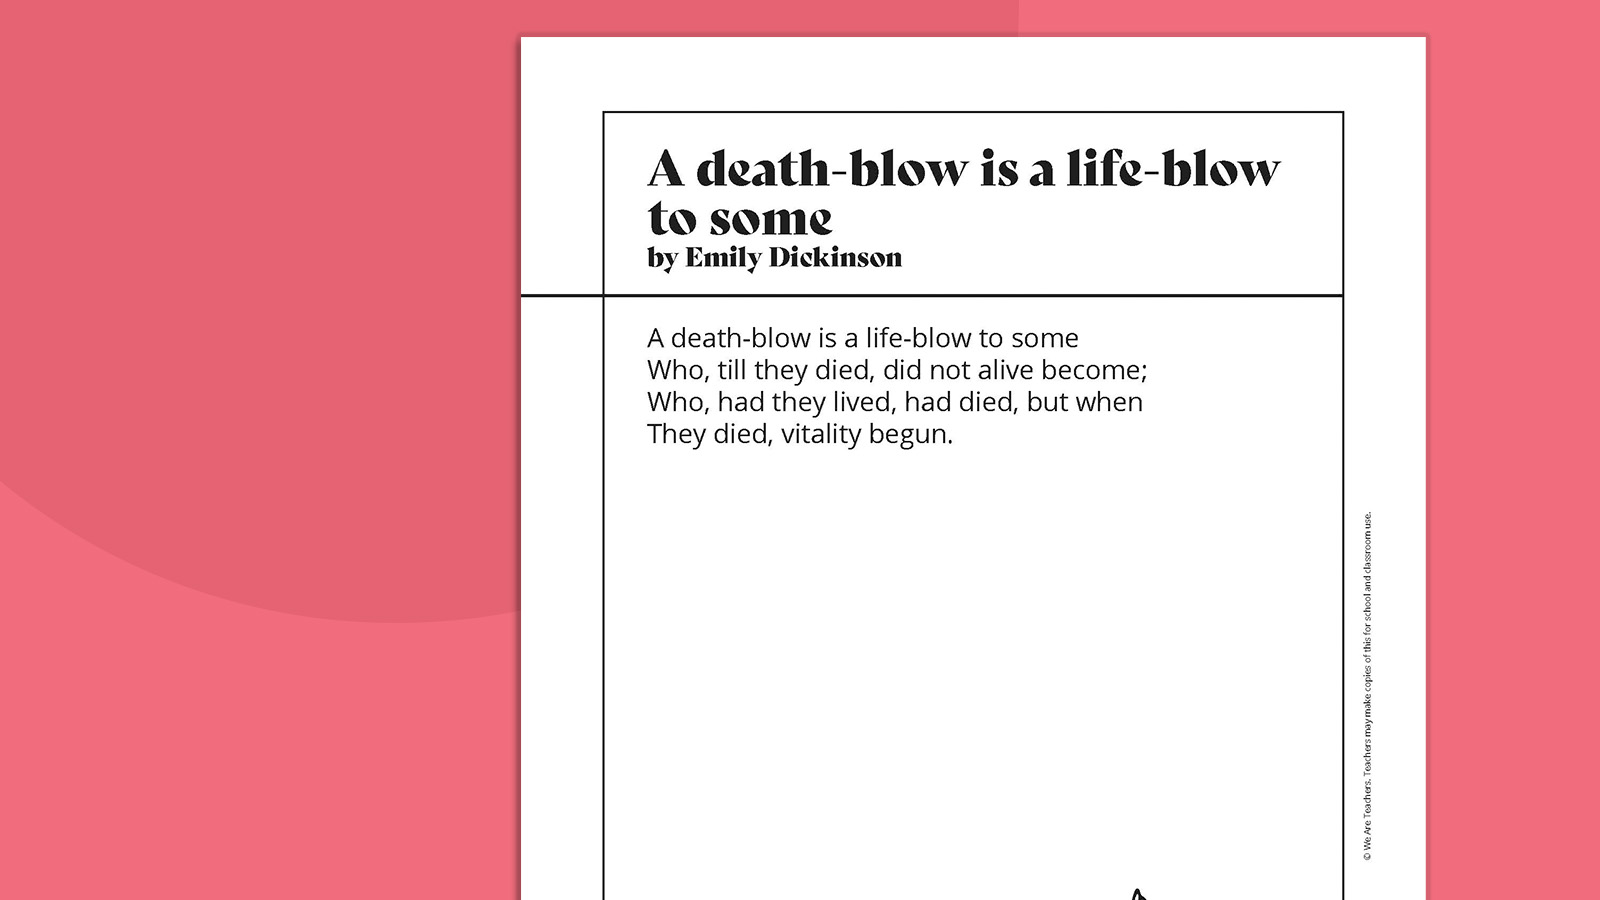 A death-blow is a life-blow to some- Emily Dickinson poems